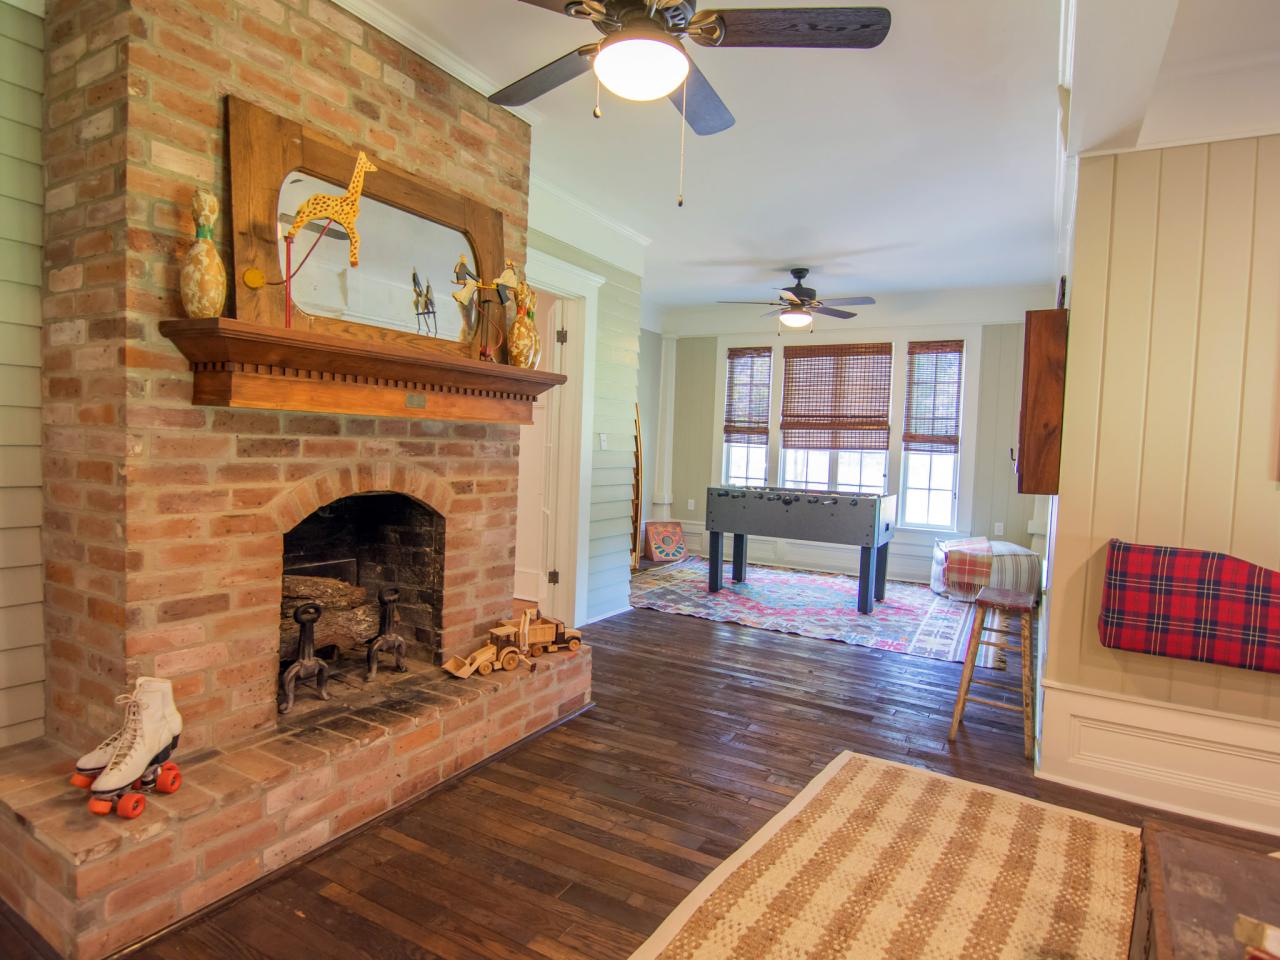 An exposed-brick fireplace.